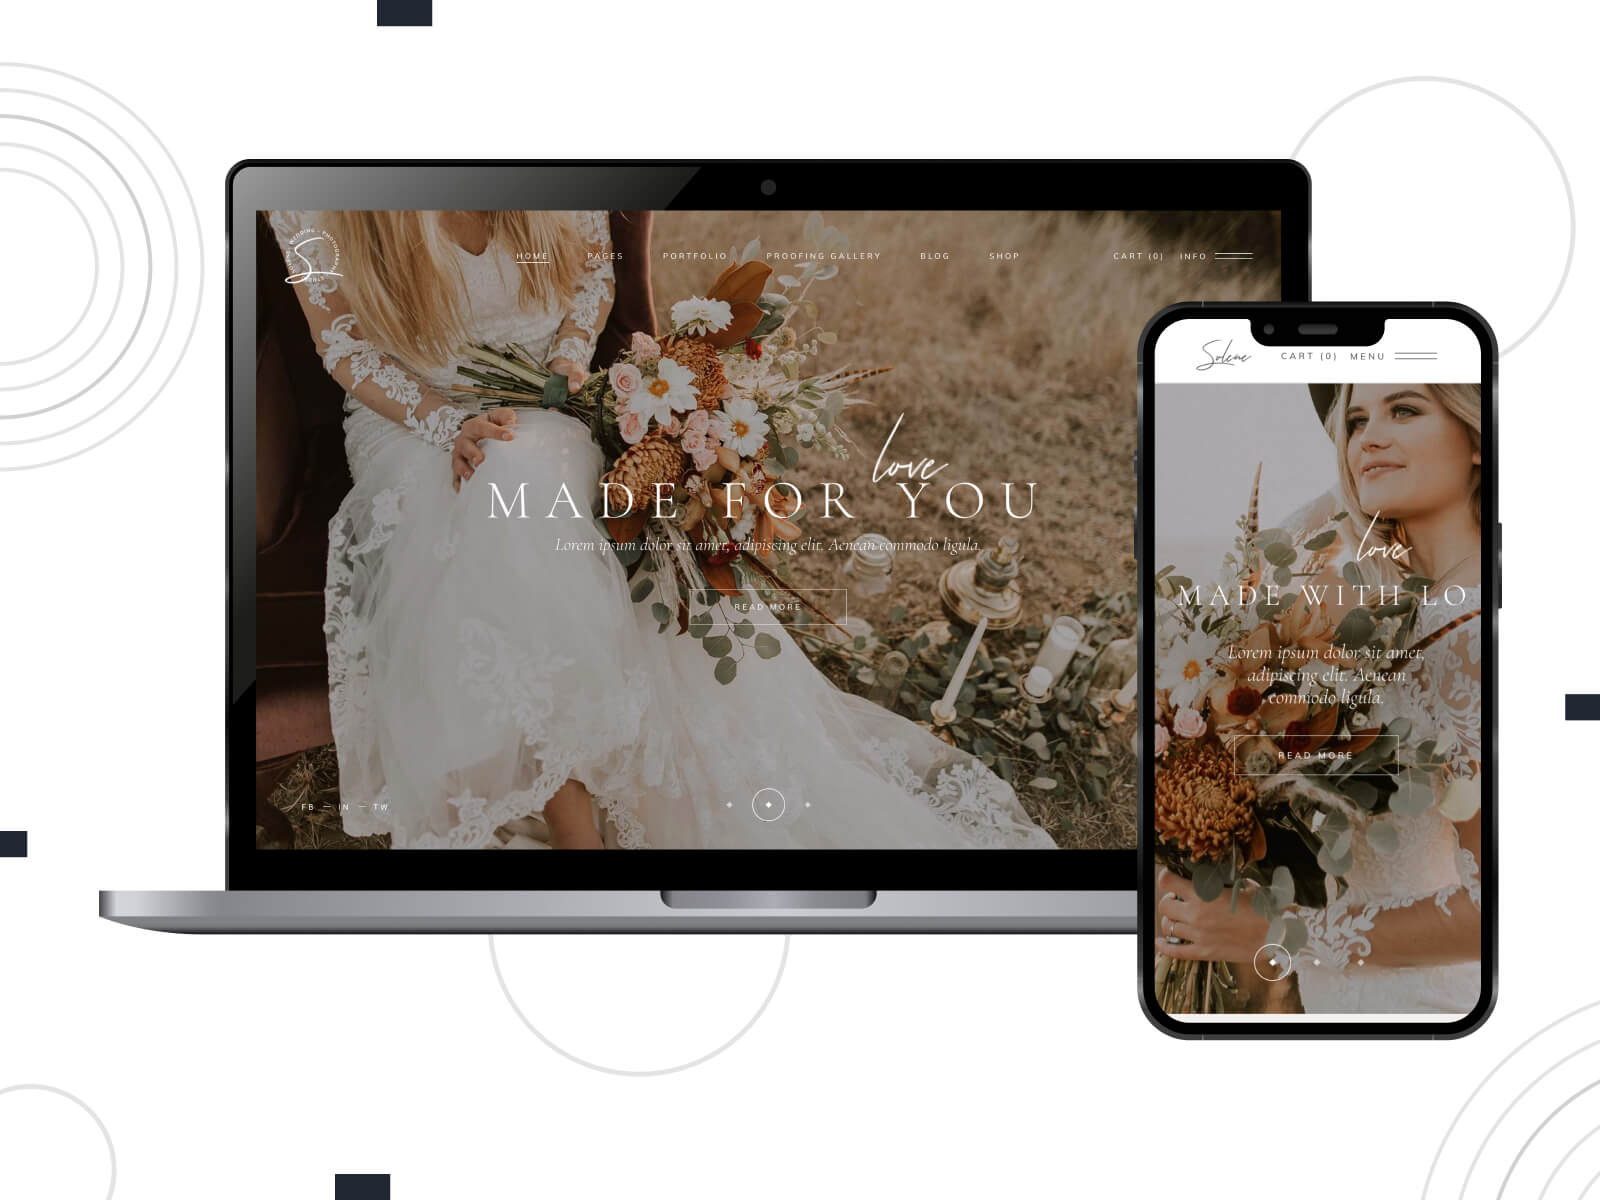 Collage of Solene - dark, rich, dreamy and whimsical WordPress themes for weddings with pastel color palettes and elegant fonts. in saddle brown, dim gray, and dark olive green color gradation.